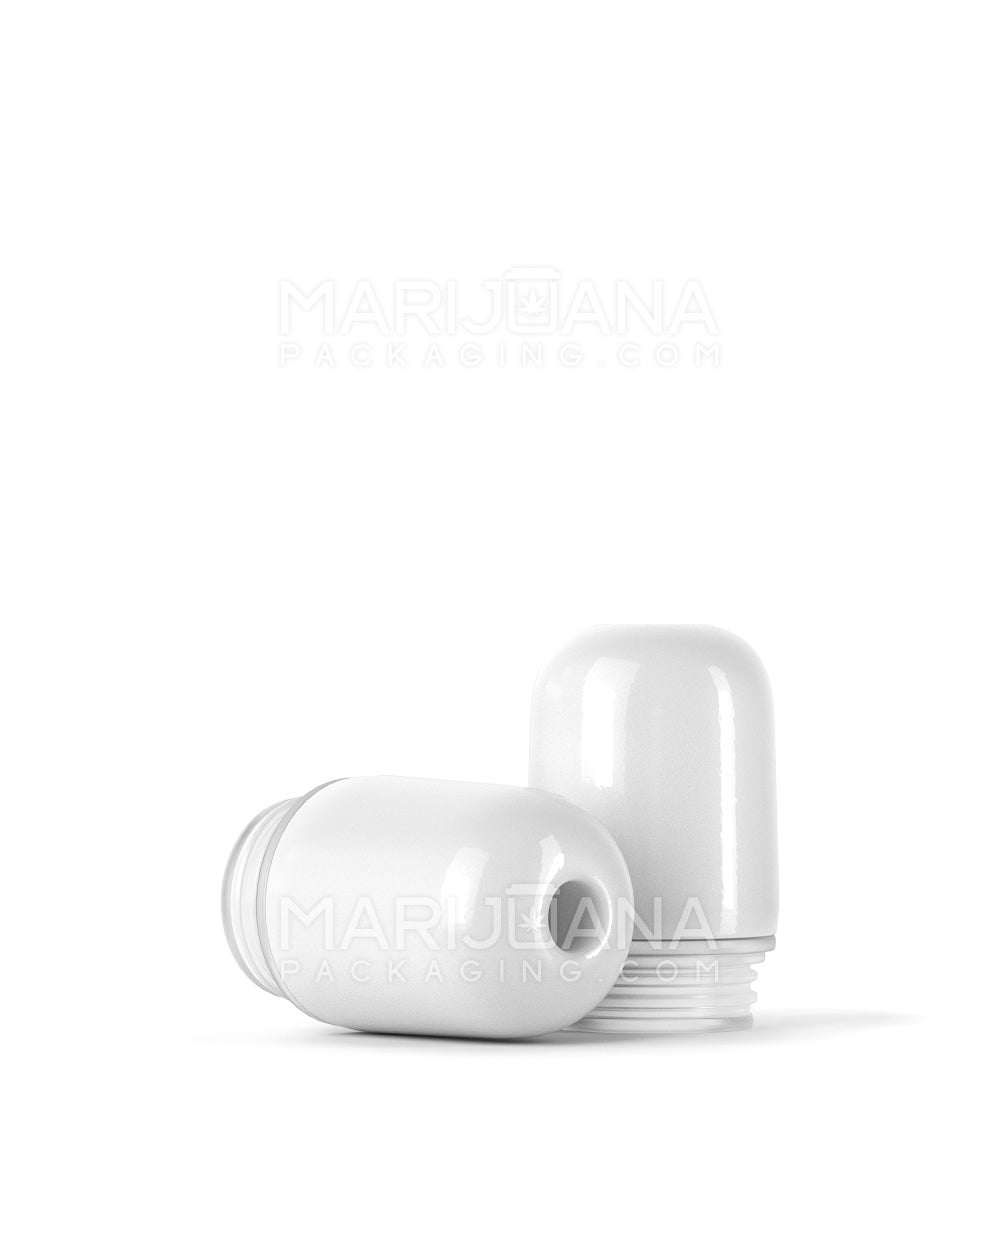 AVD | Round Vape Mouthpiece for Glass Cartridges | White Ceramic - Eazy Press - 600 Count - 1